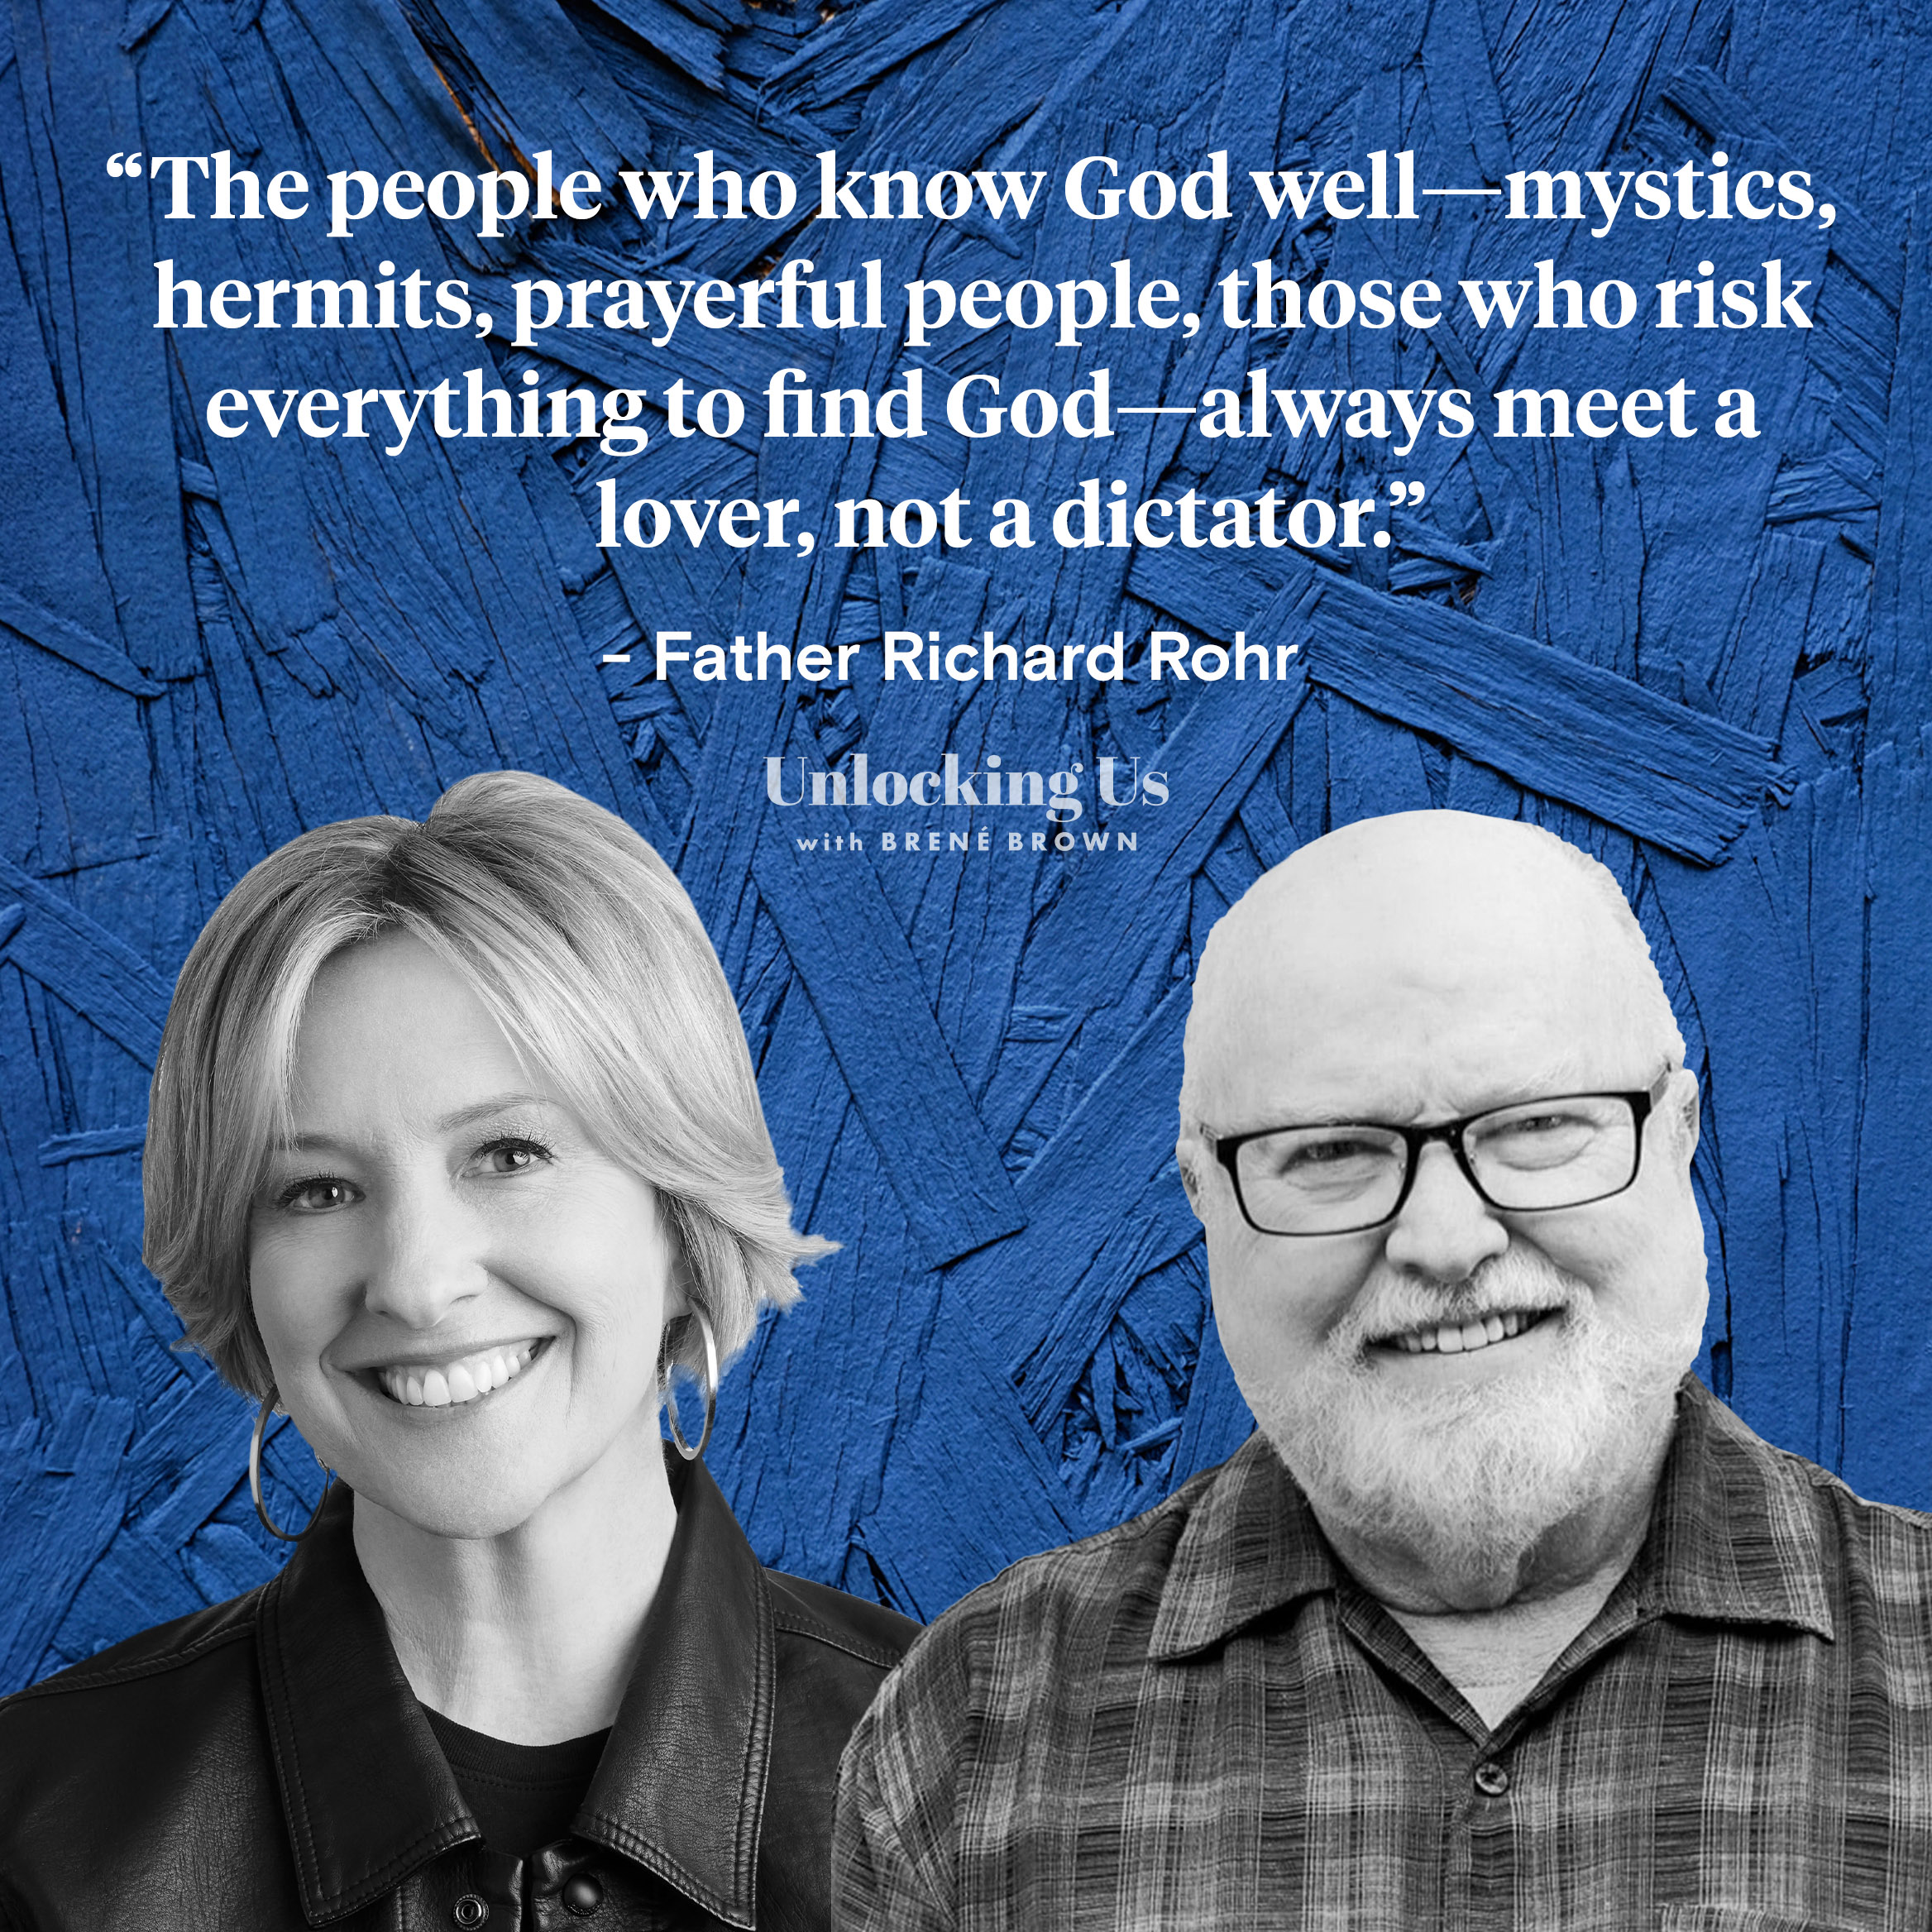 A quote from Father Richard Rohr: The people who know God well—mystics, hermits, prayerful people, those who risk everything to find God—always meet a lover, not a dictator.